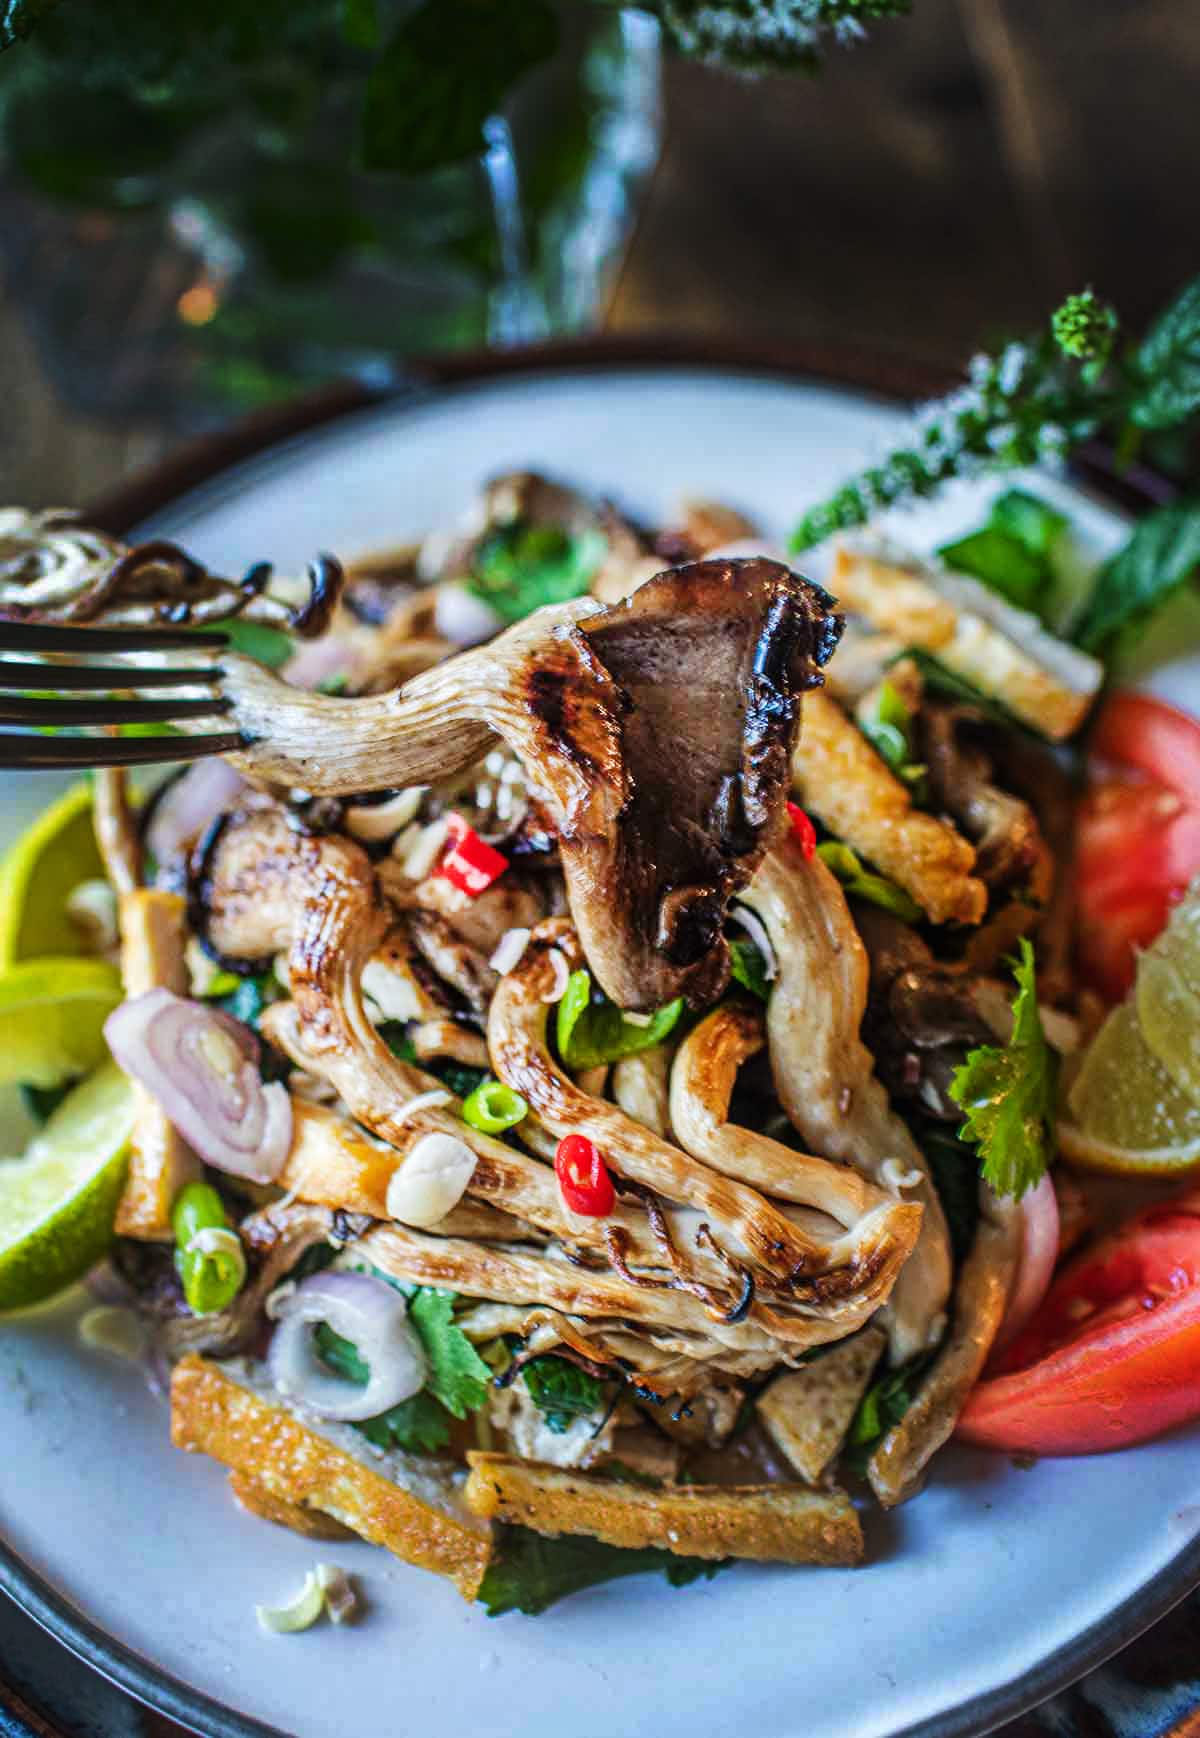 Thai Oyster Mushroom Salad with Crispy Tofu is a simple, delicious recipe infused with fresh Thai flavors- lemongrass, shallot, mint, cilantro, and fresh lime juice. A light and healthy meal-all in one dish! 